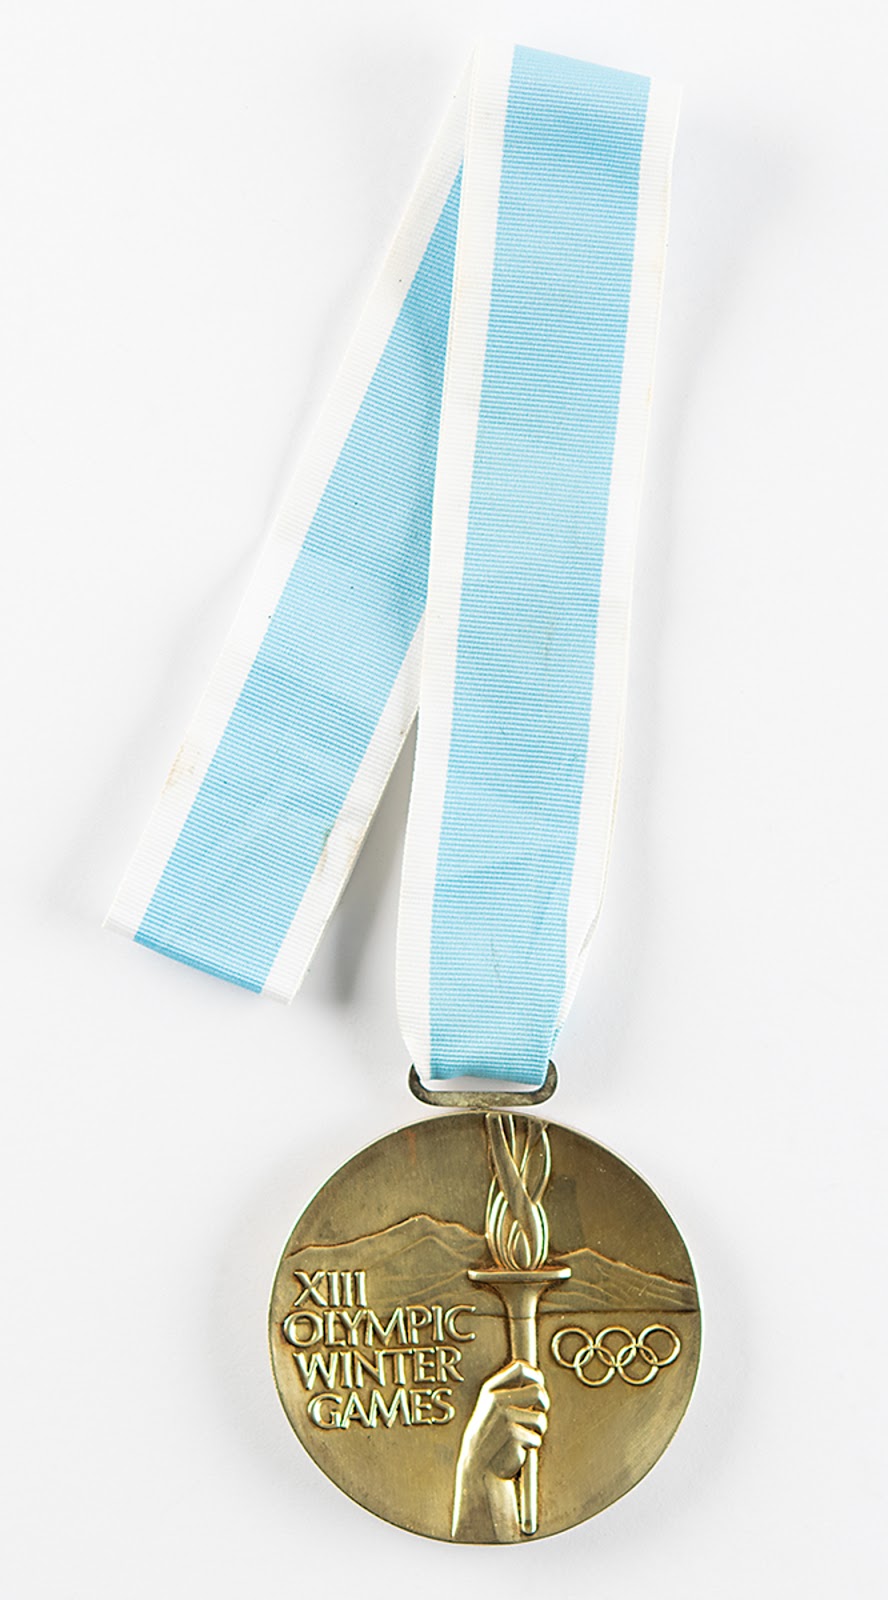 The Lake Placid 1980 gold winner’s medal awarded to Russian skater Alexander Zaitsev. This medal was manufactured by luxury jewelry company Tiffany & Co. and retains its original light blue and white ribbon. RR Auction sold this lot for $93,748.